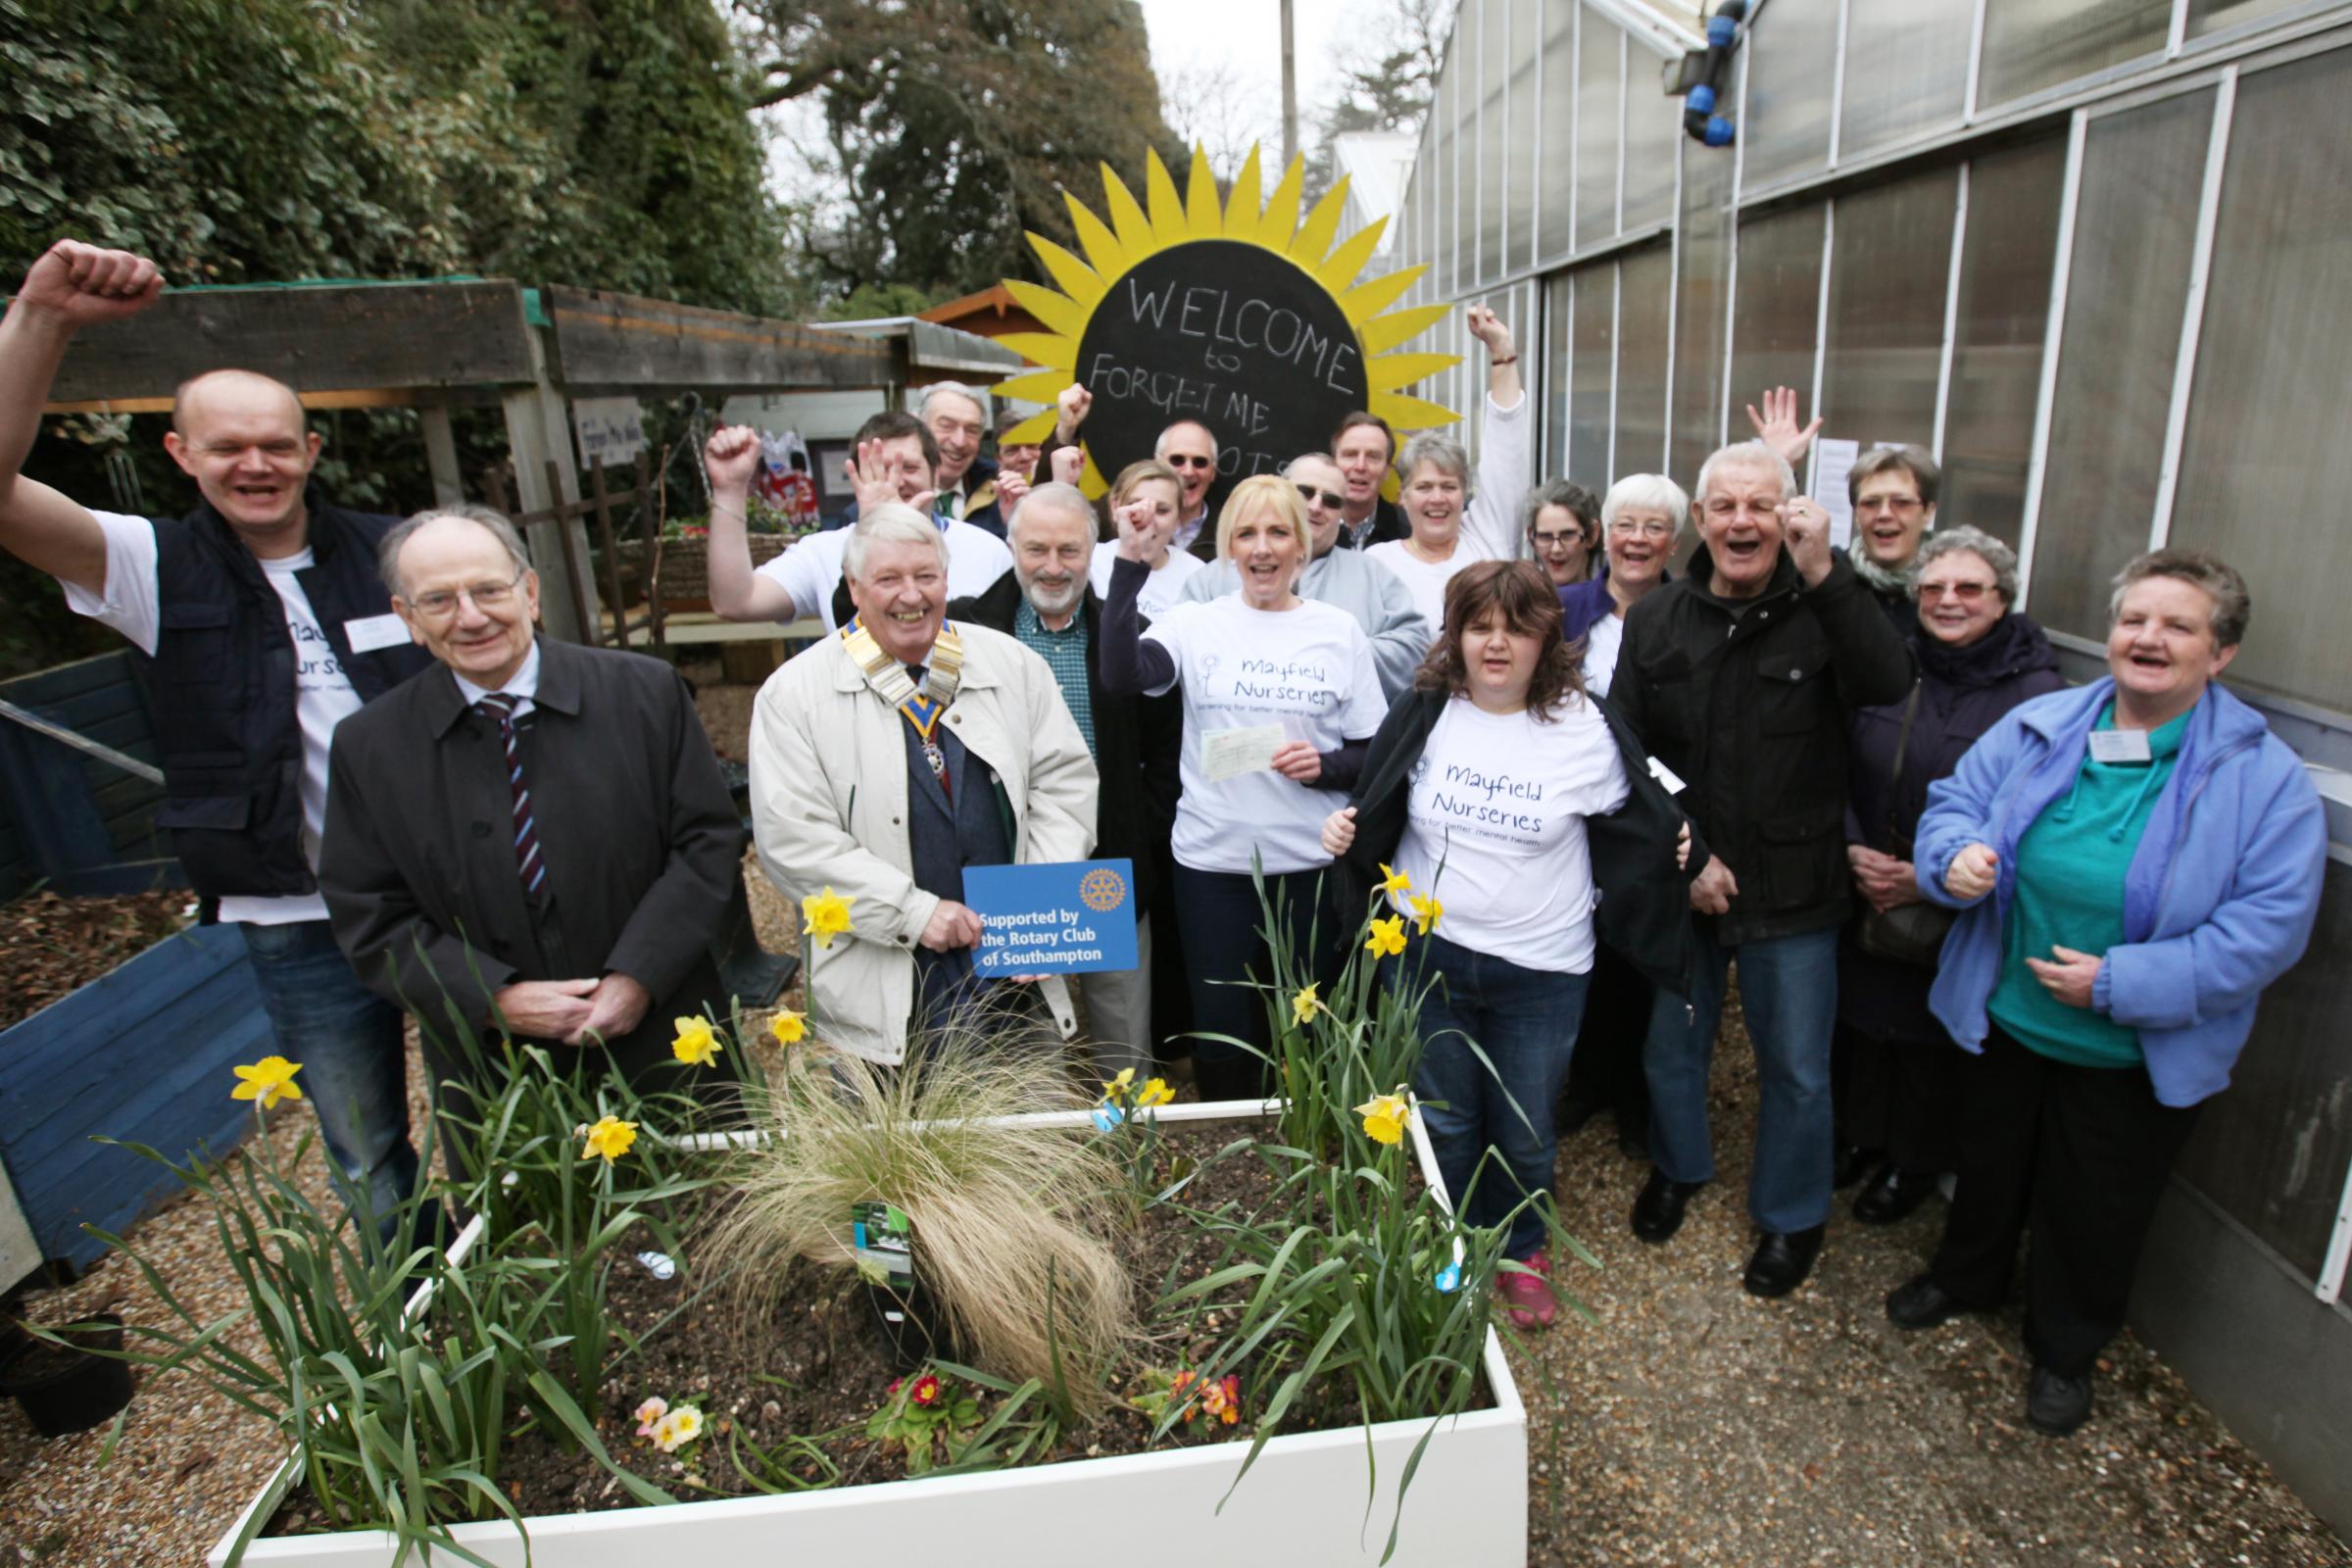 The Forget Me Not Gardening Group At Mayfield Nurseries Has Received More Funding Daily Echo